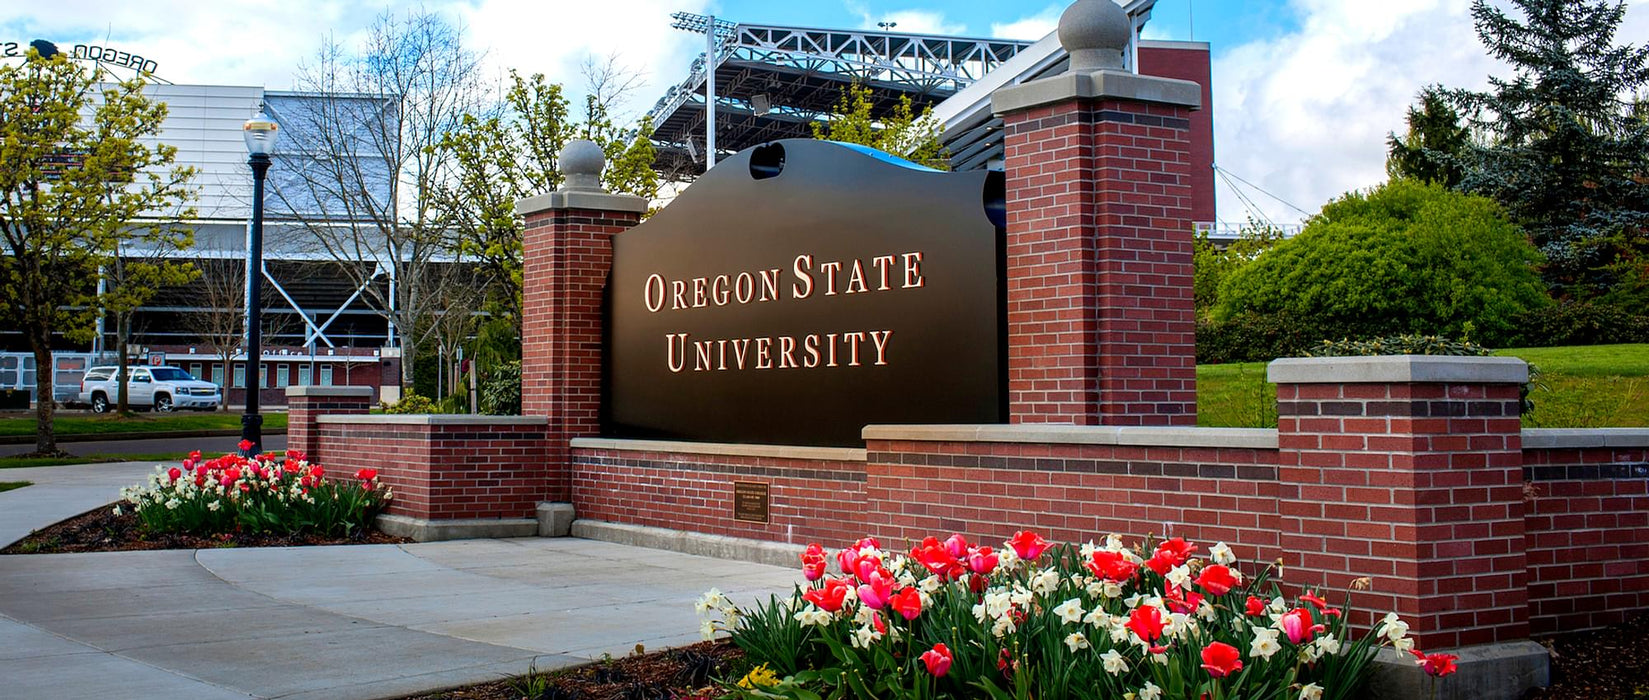 Bachelor of Science - Business Administration at Oregon State University - Corvallis: Tuition: $32,790.00 USD/year (Scholarship Available)